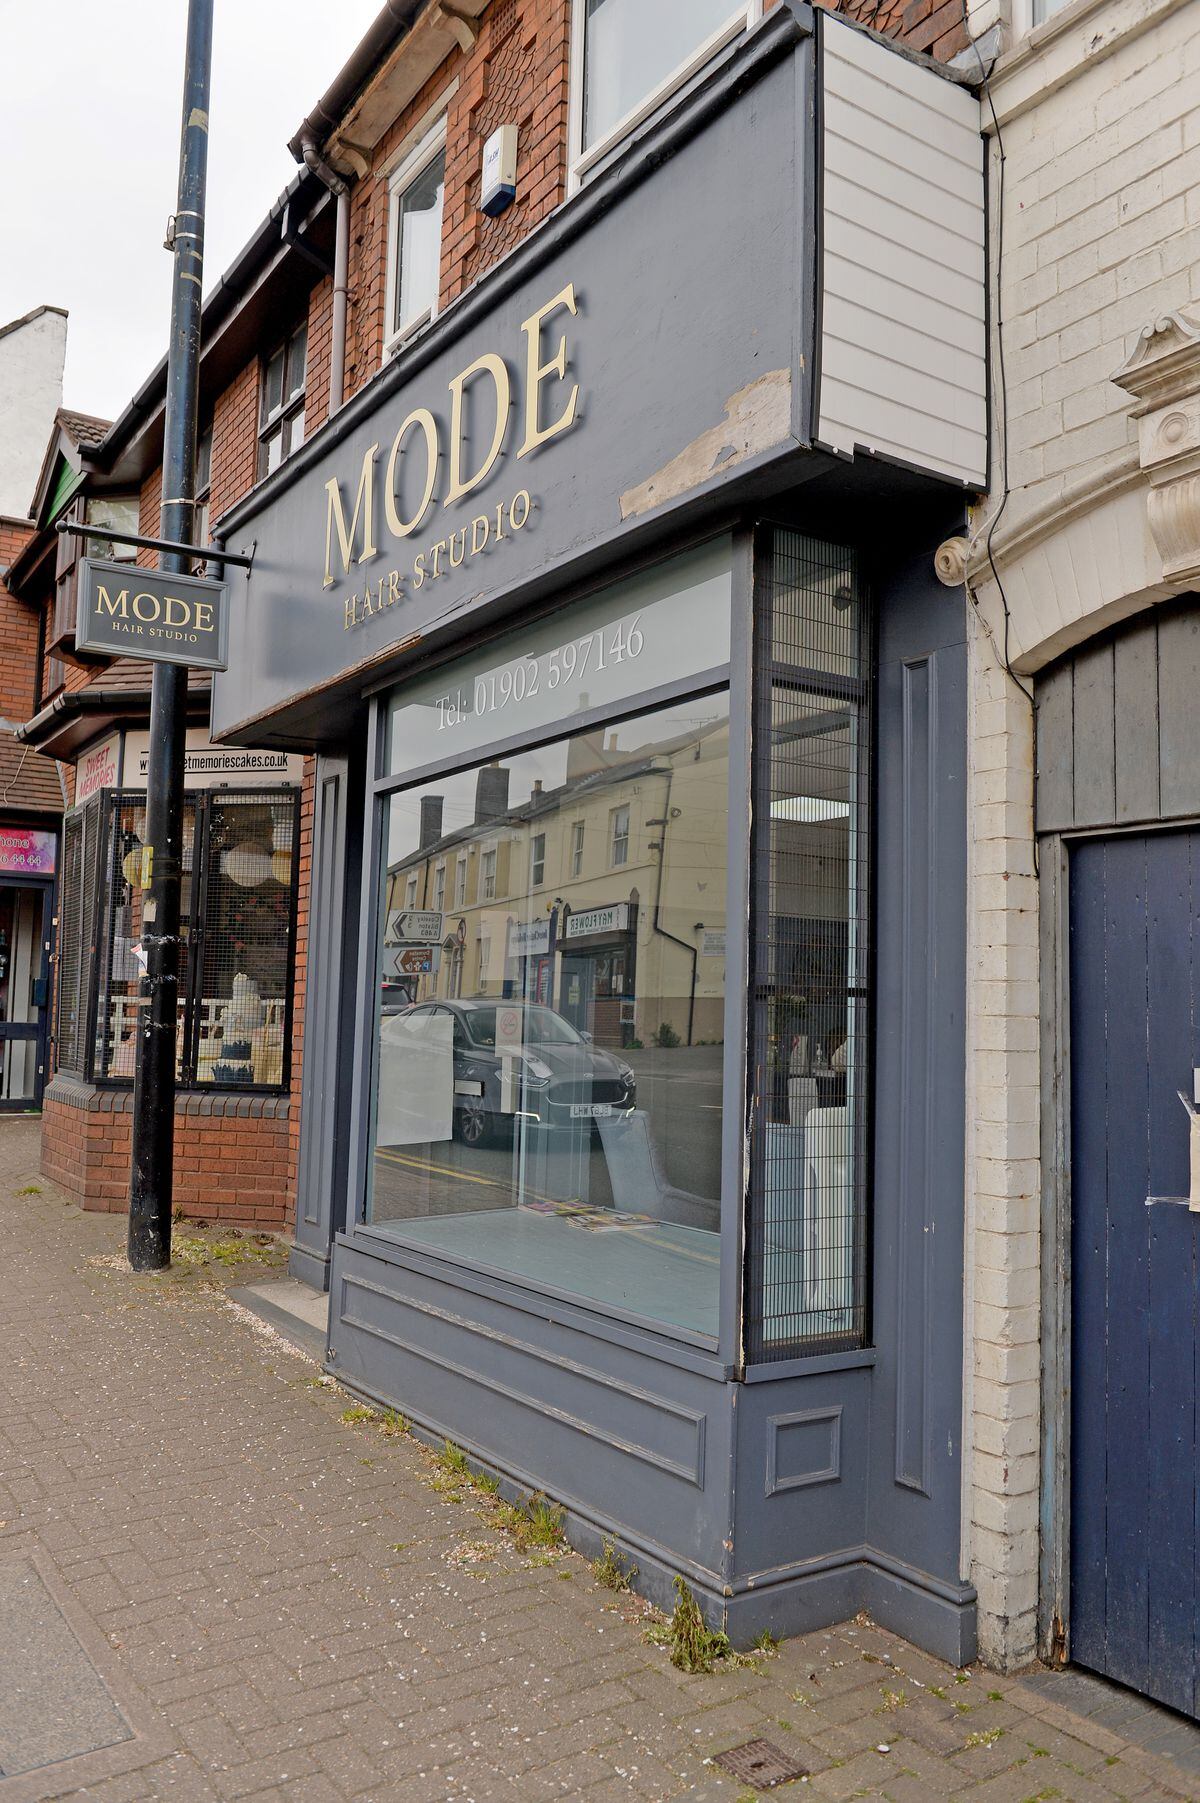 Mode Hair Studio has been part of the town for a two decades